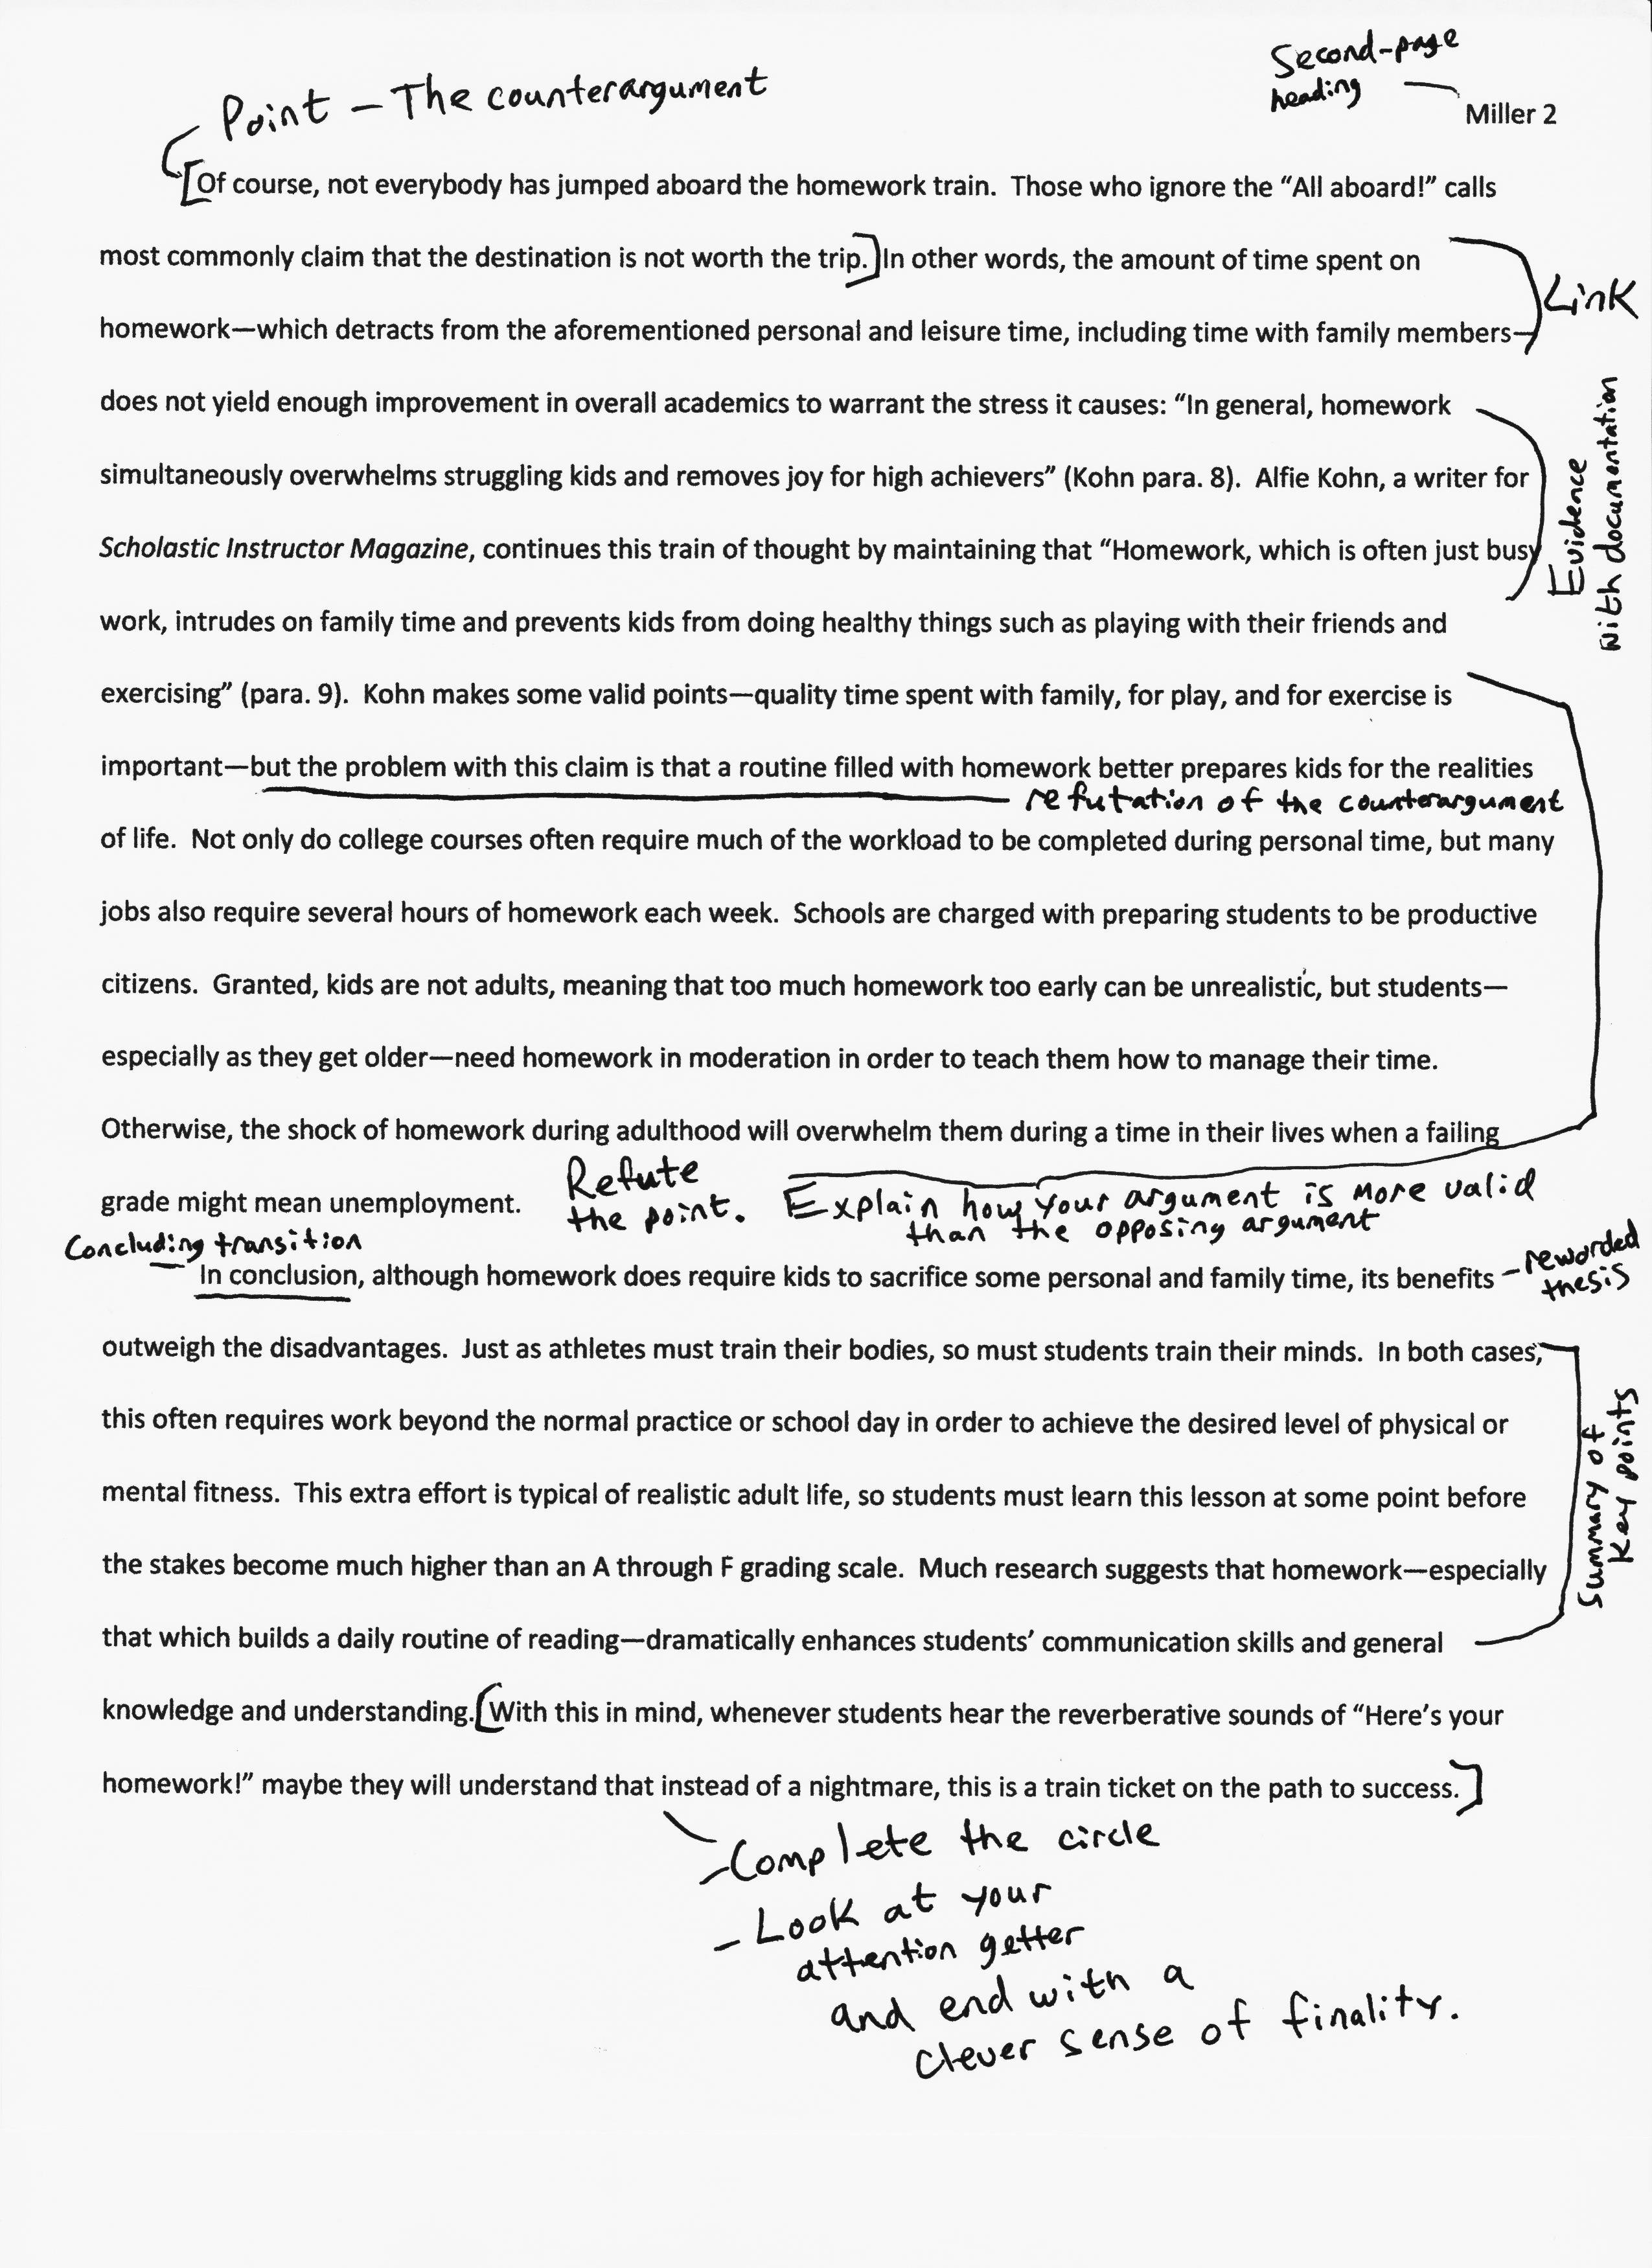 ideas for argument research paper